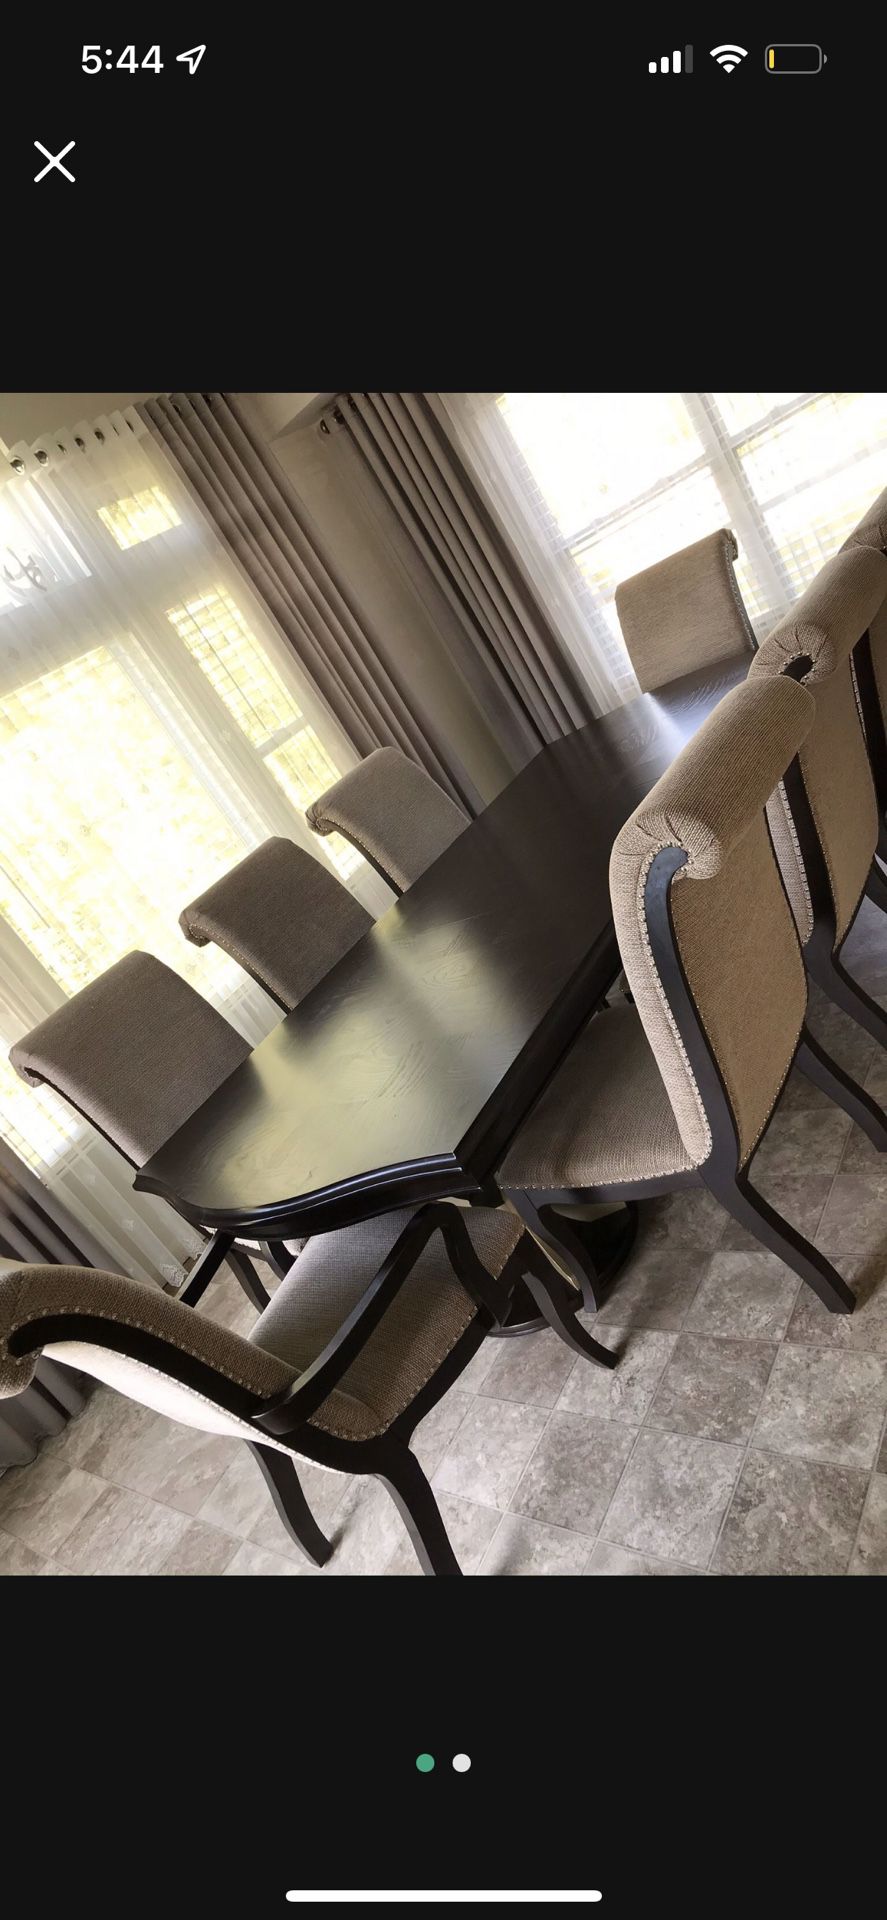 8 PERSON DINING TABLE SET FOR SALE 